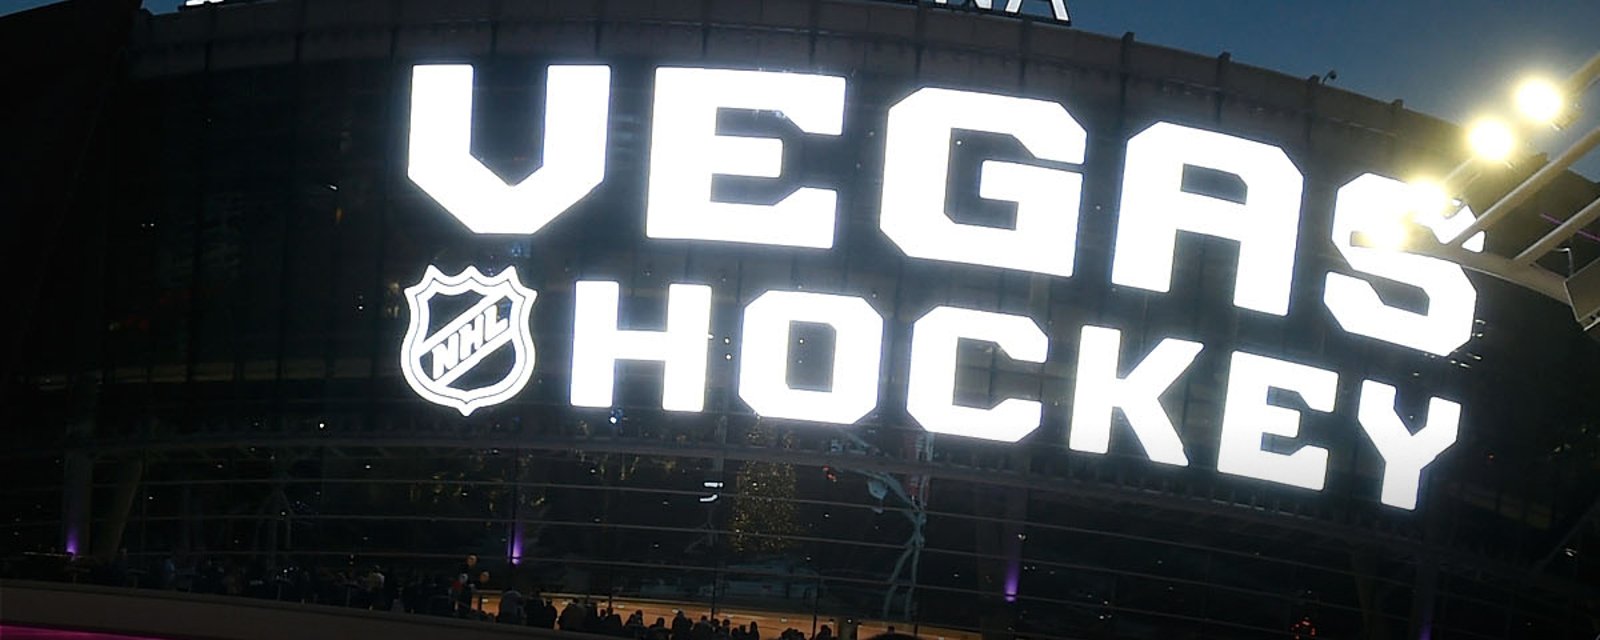 Major controversy surrounding Golden Knights, forced to issue apology again